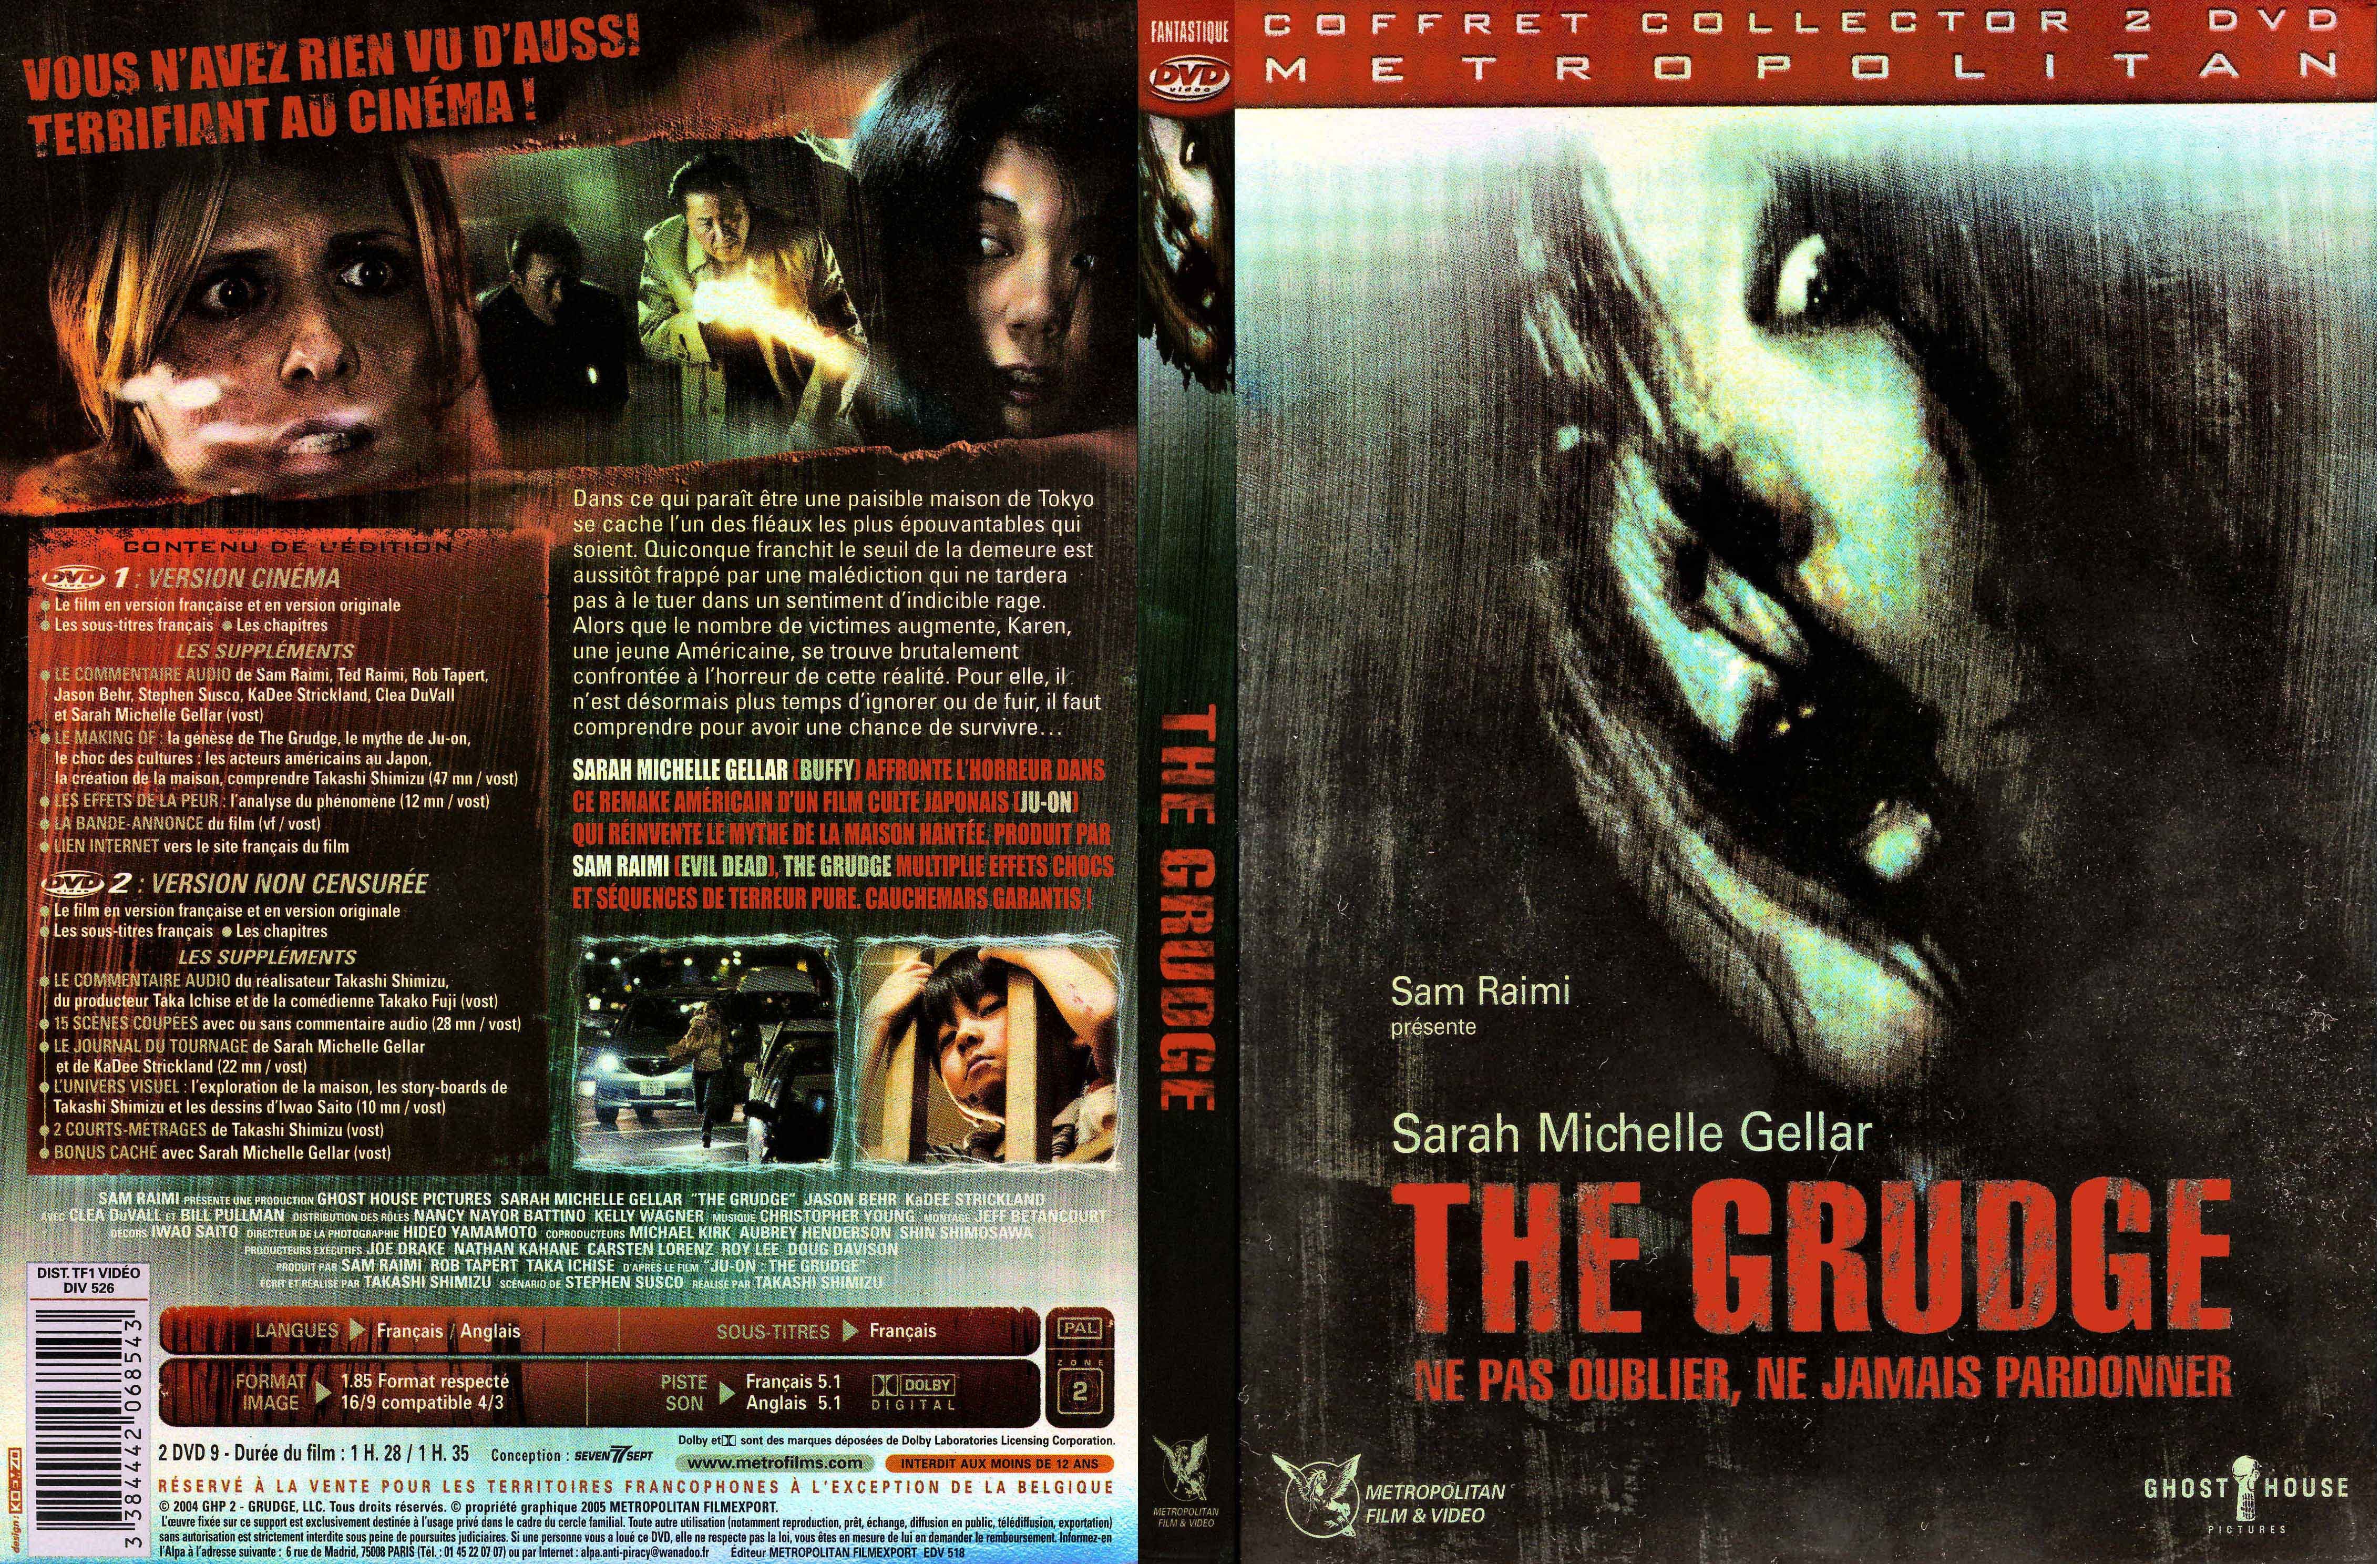 Jaquette DVD The Grudge v2